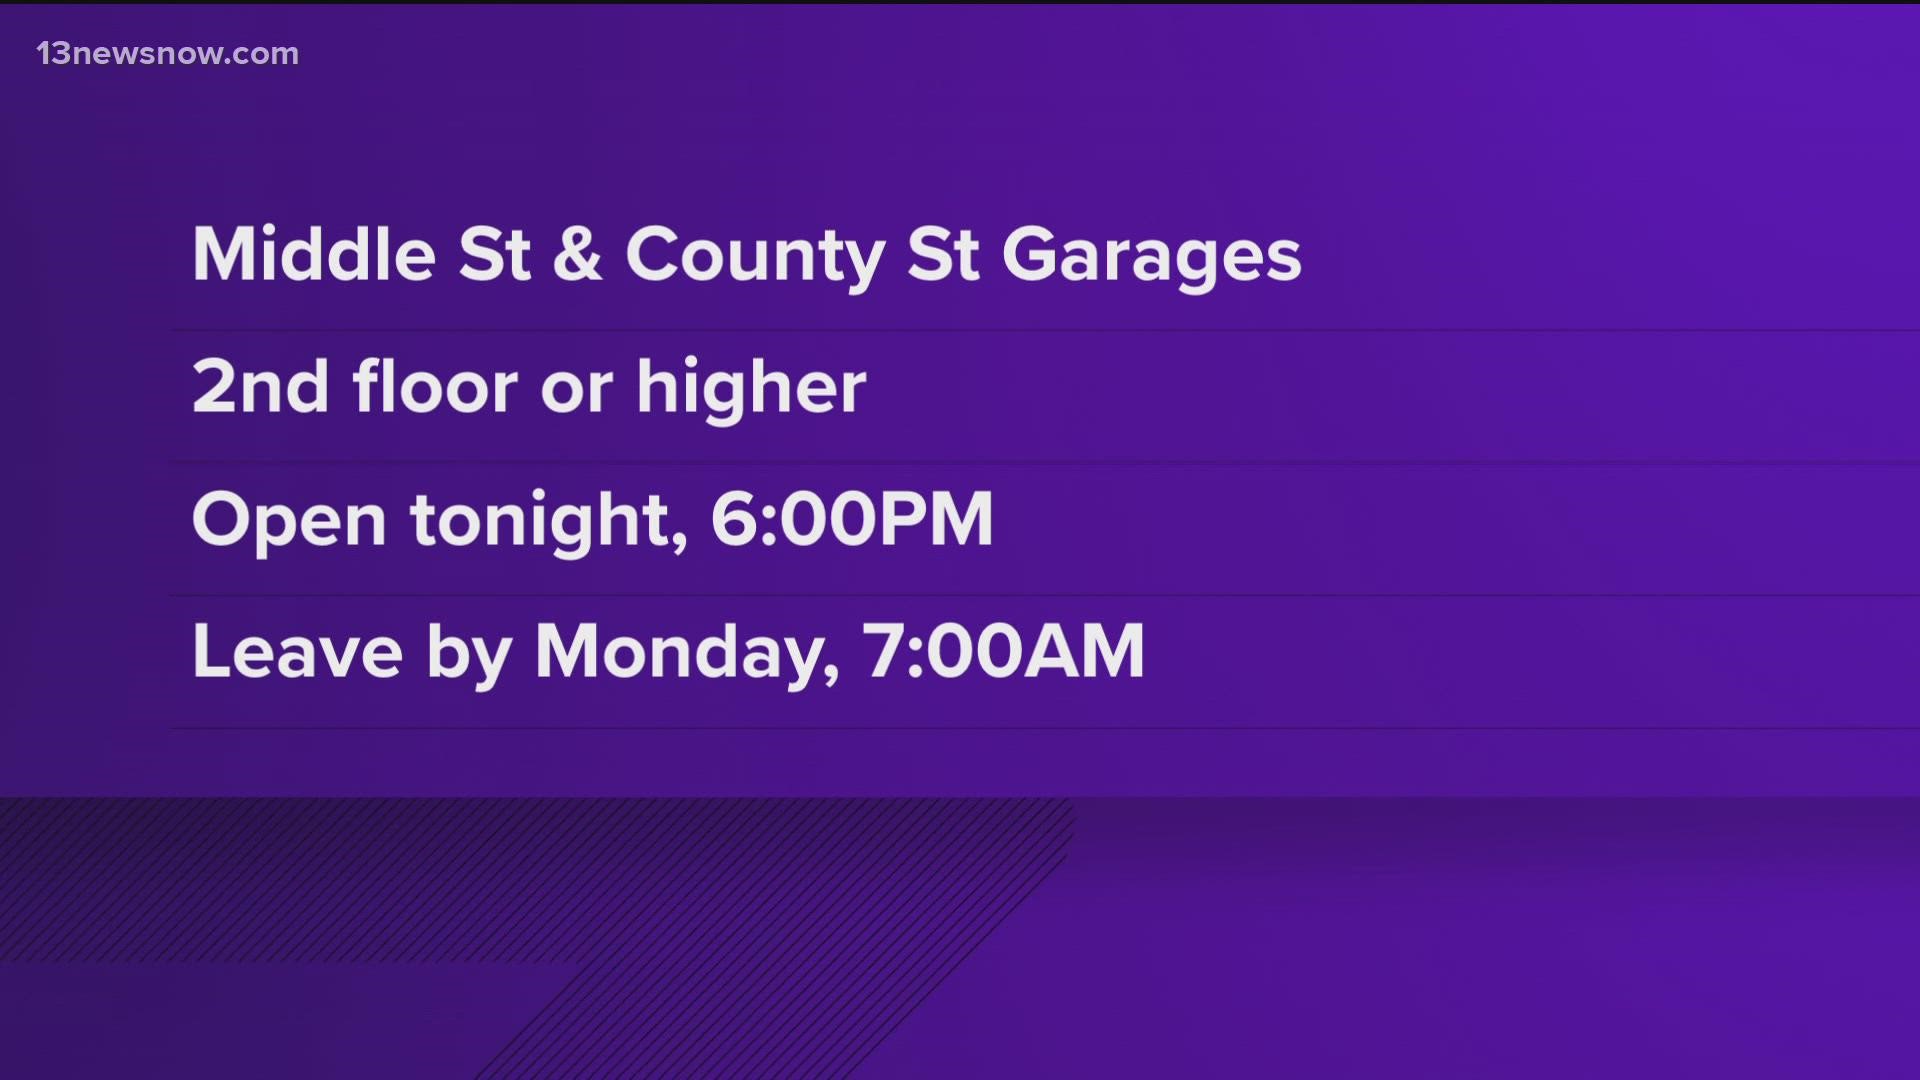 With heavy rain and flooding a possibility this weekend from Hurricane Ian, Portsmouth residents can move their cars to higher ground, beginning on Thursday night.